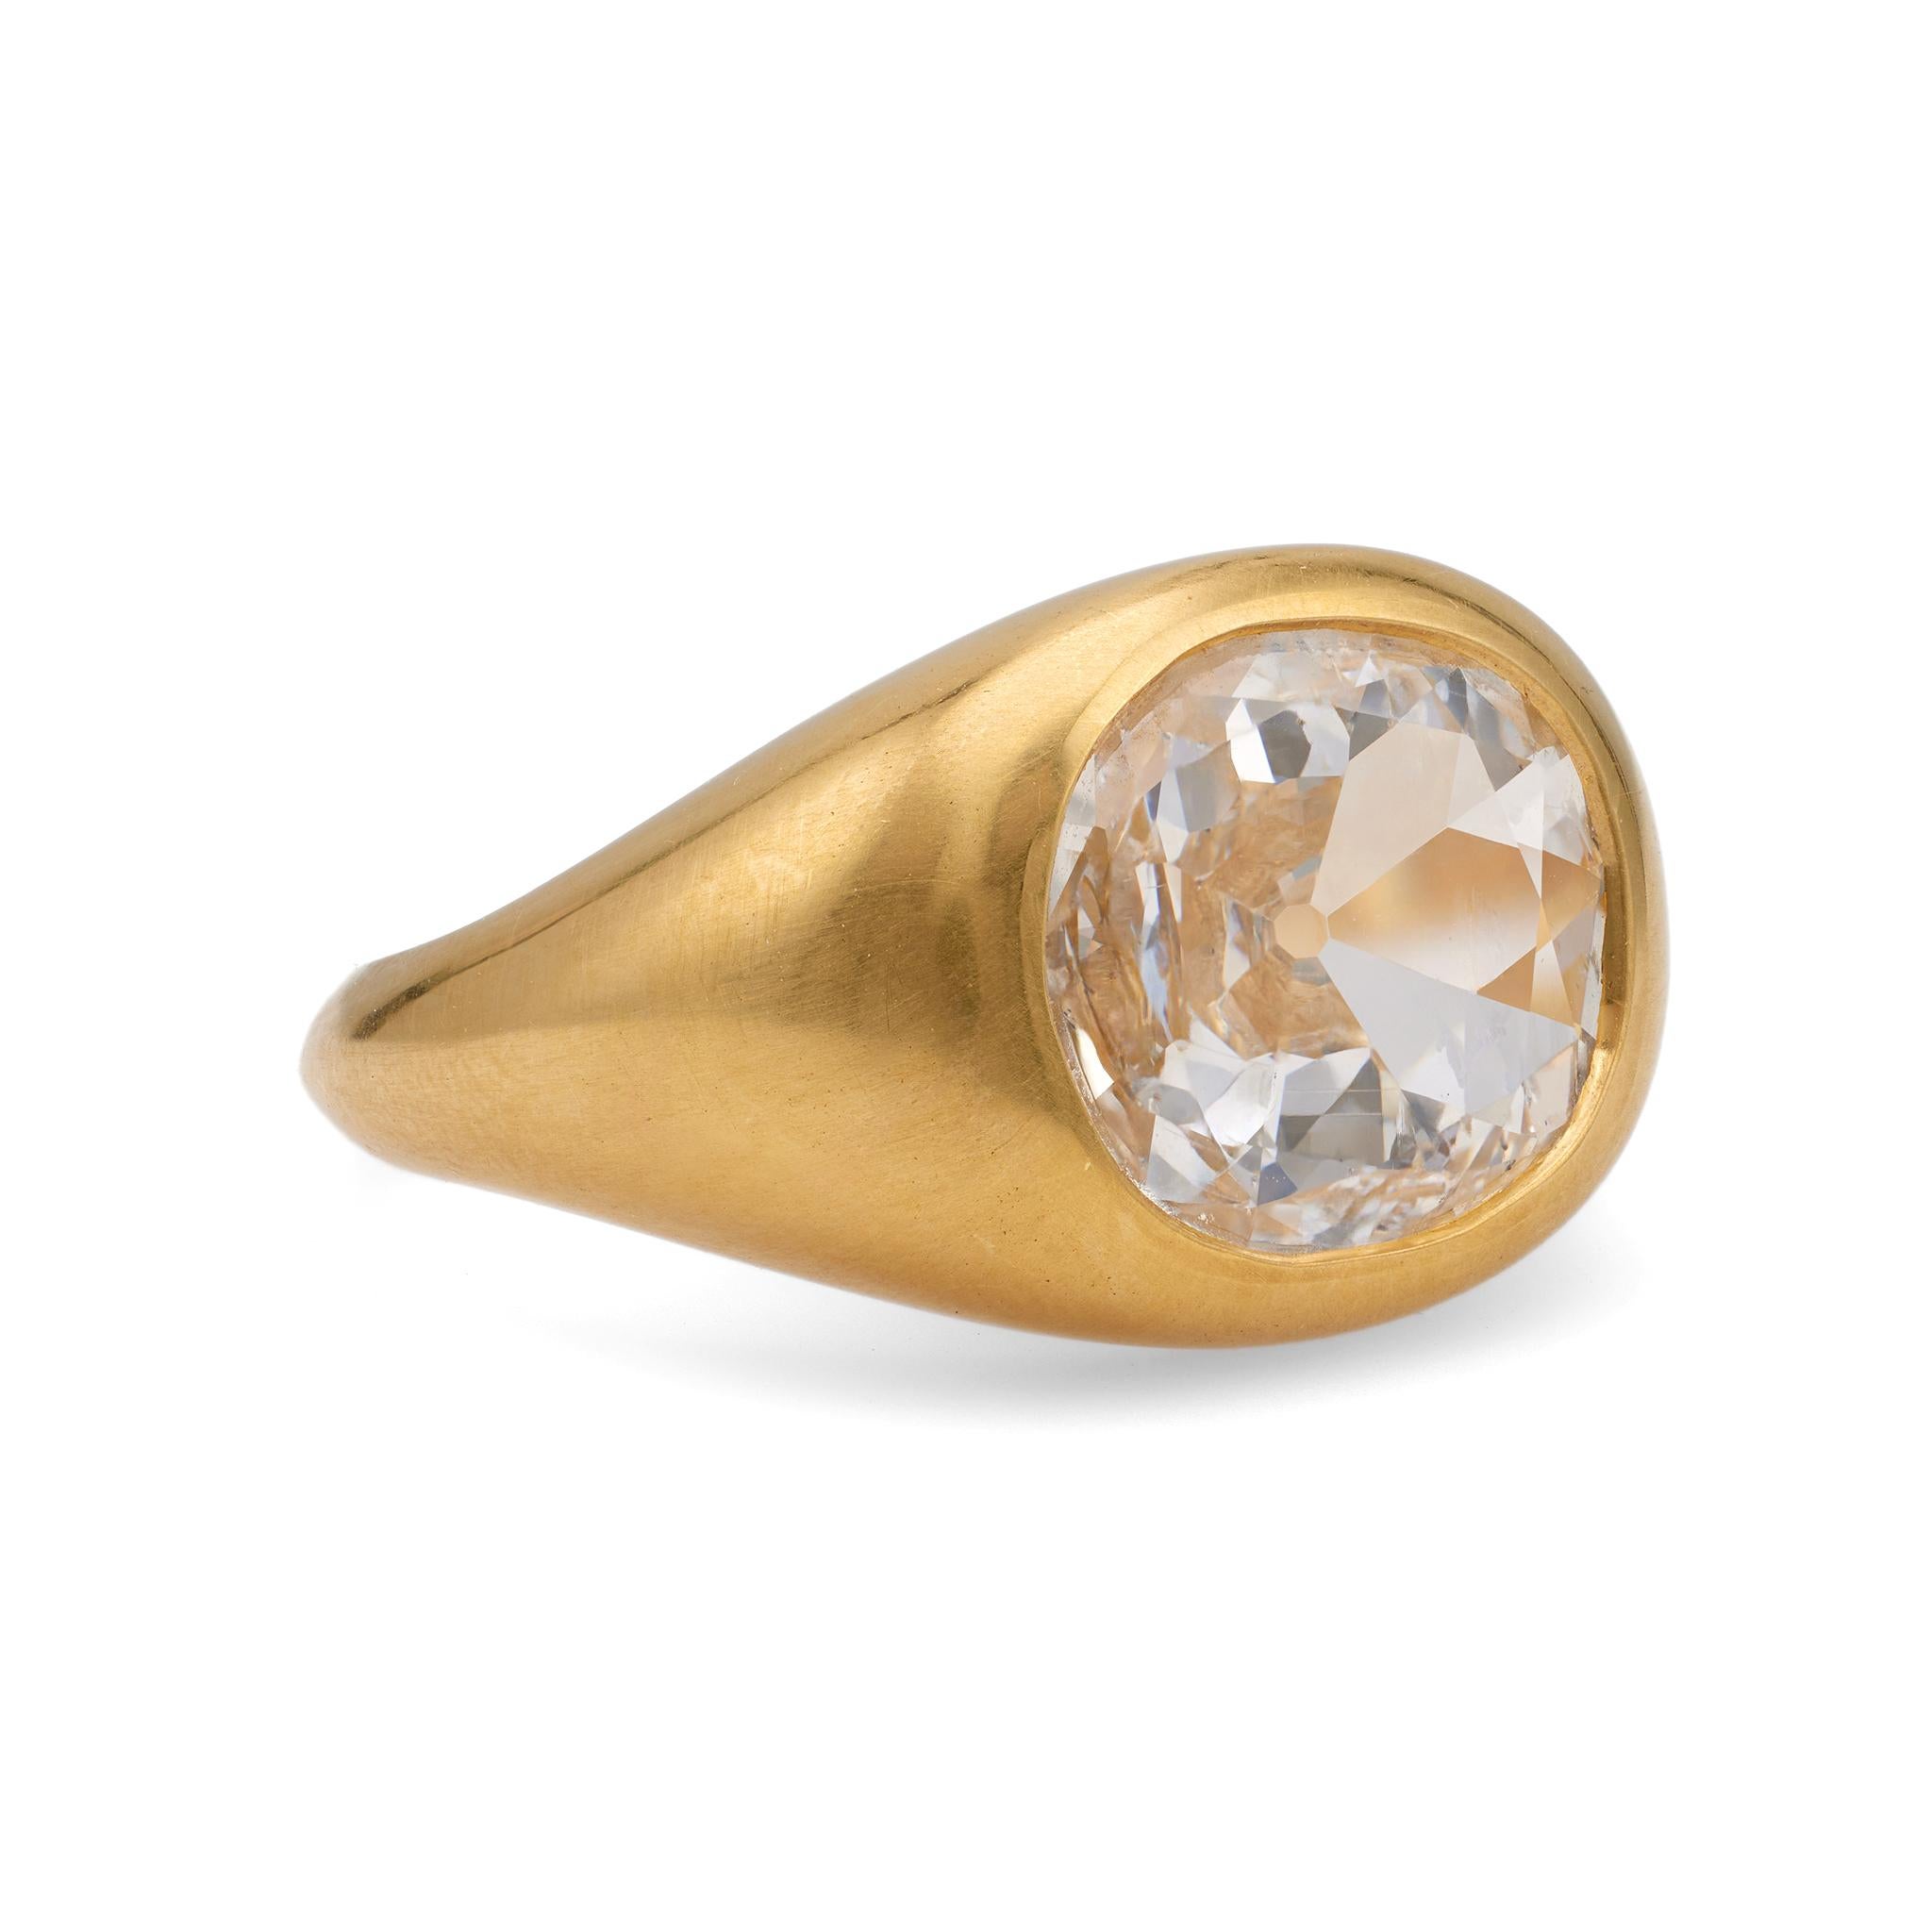 Women's or Men's GIA 3.09 Carat Old Mine Cut Diamond 20k Yellow Gold Ring For Sale